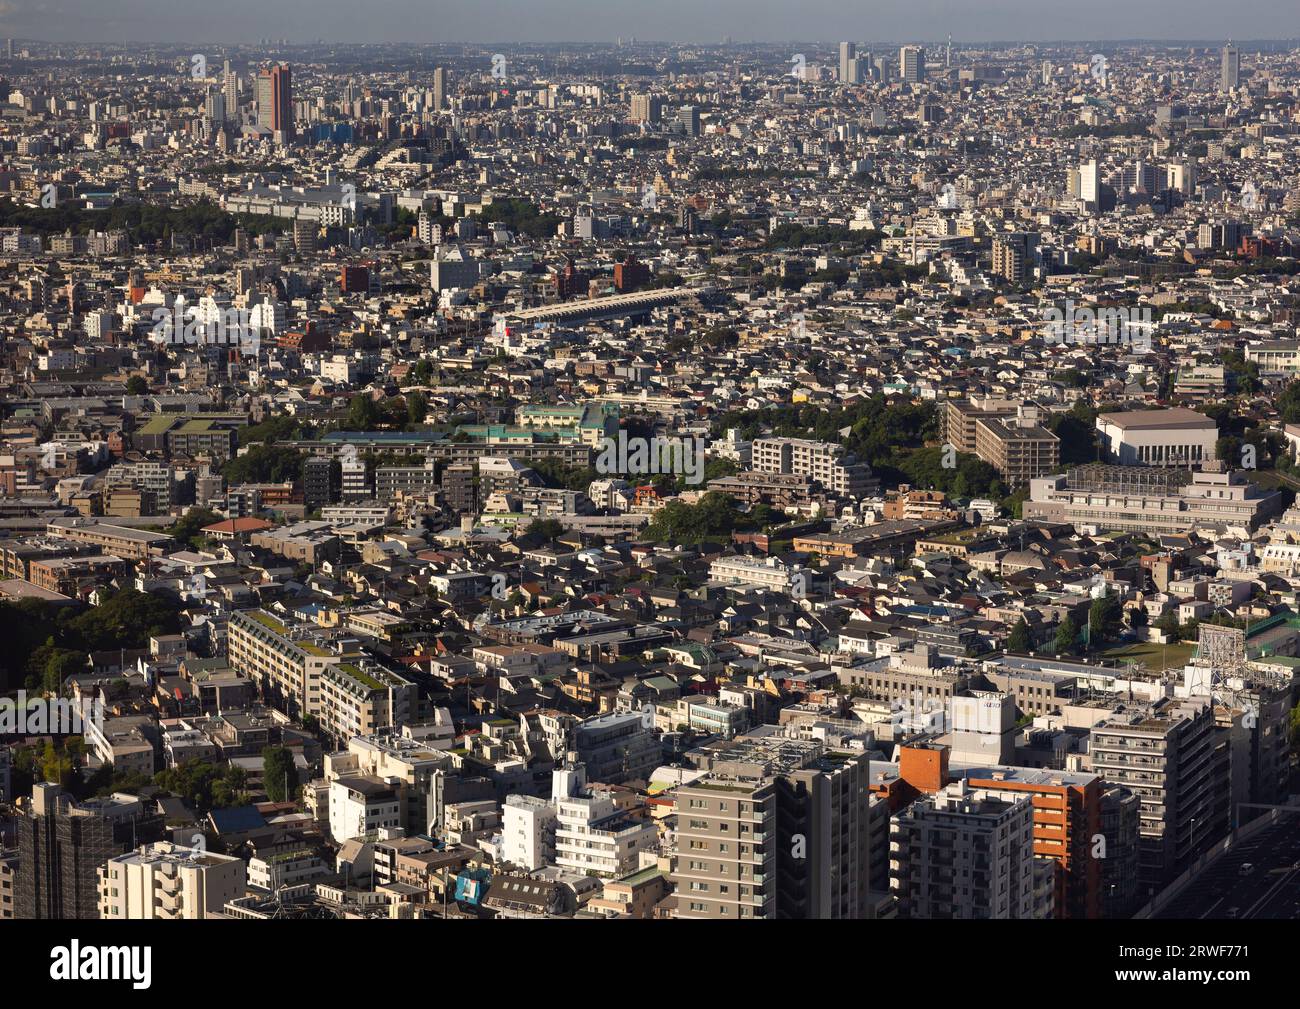 Aerial view of the city, Kanto region, Tokyo, Japan Stock Photo